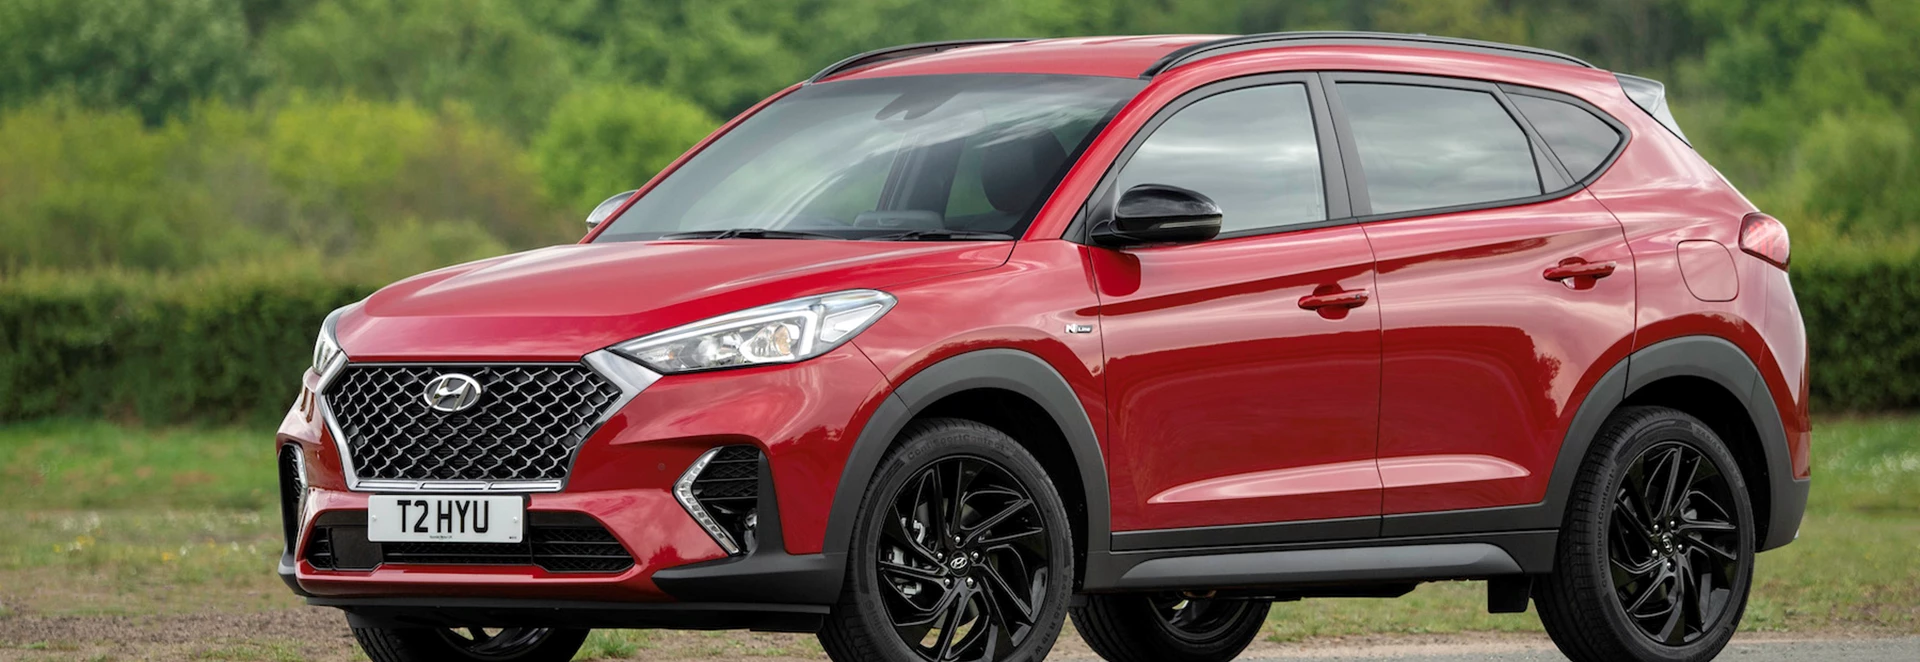 2021 Hyundai Tucson: What you need to know